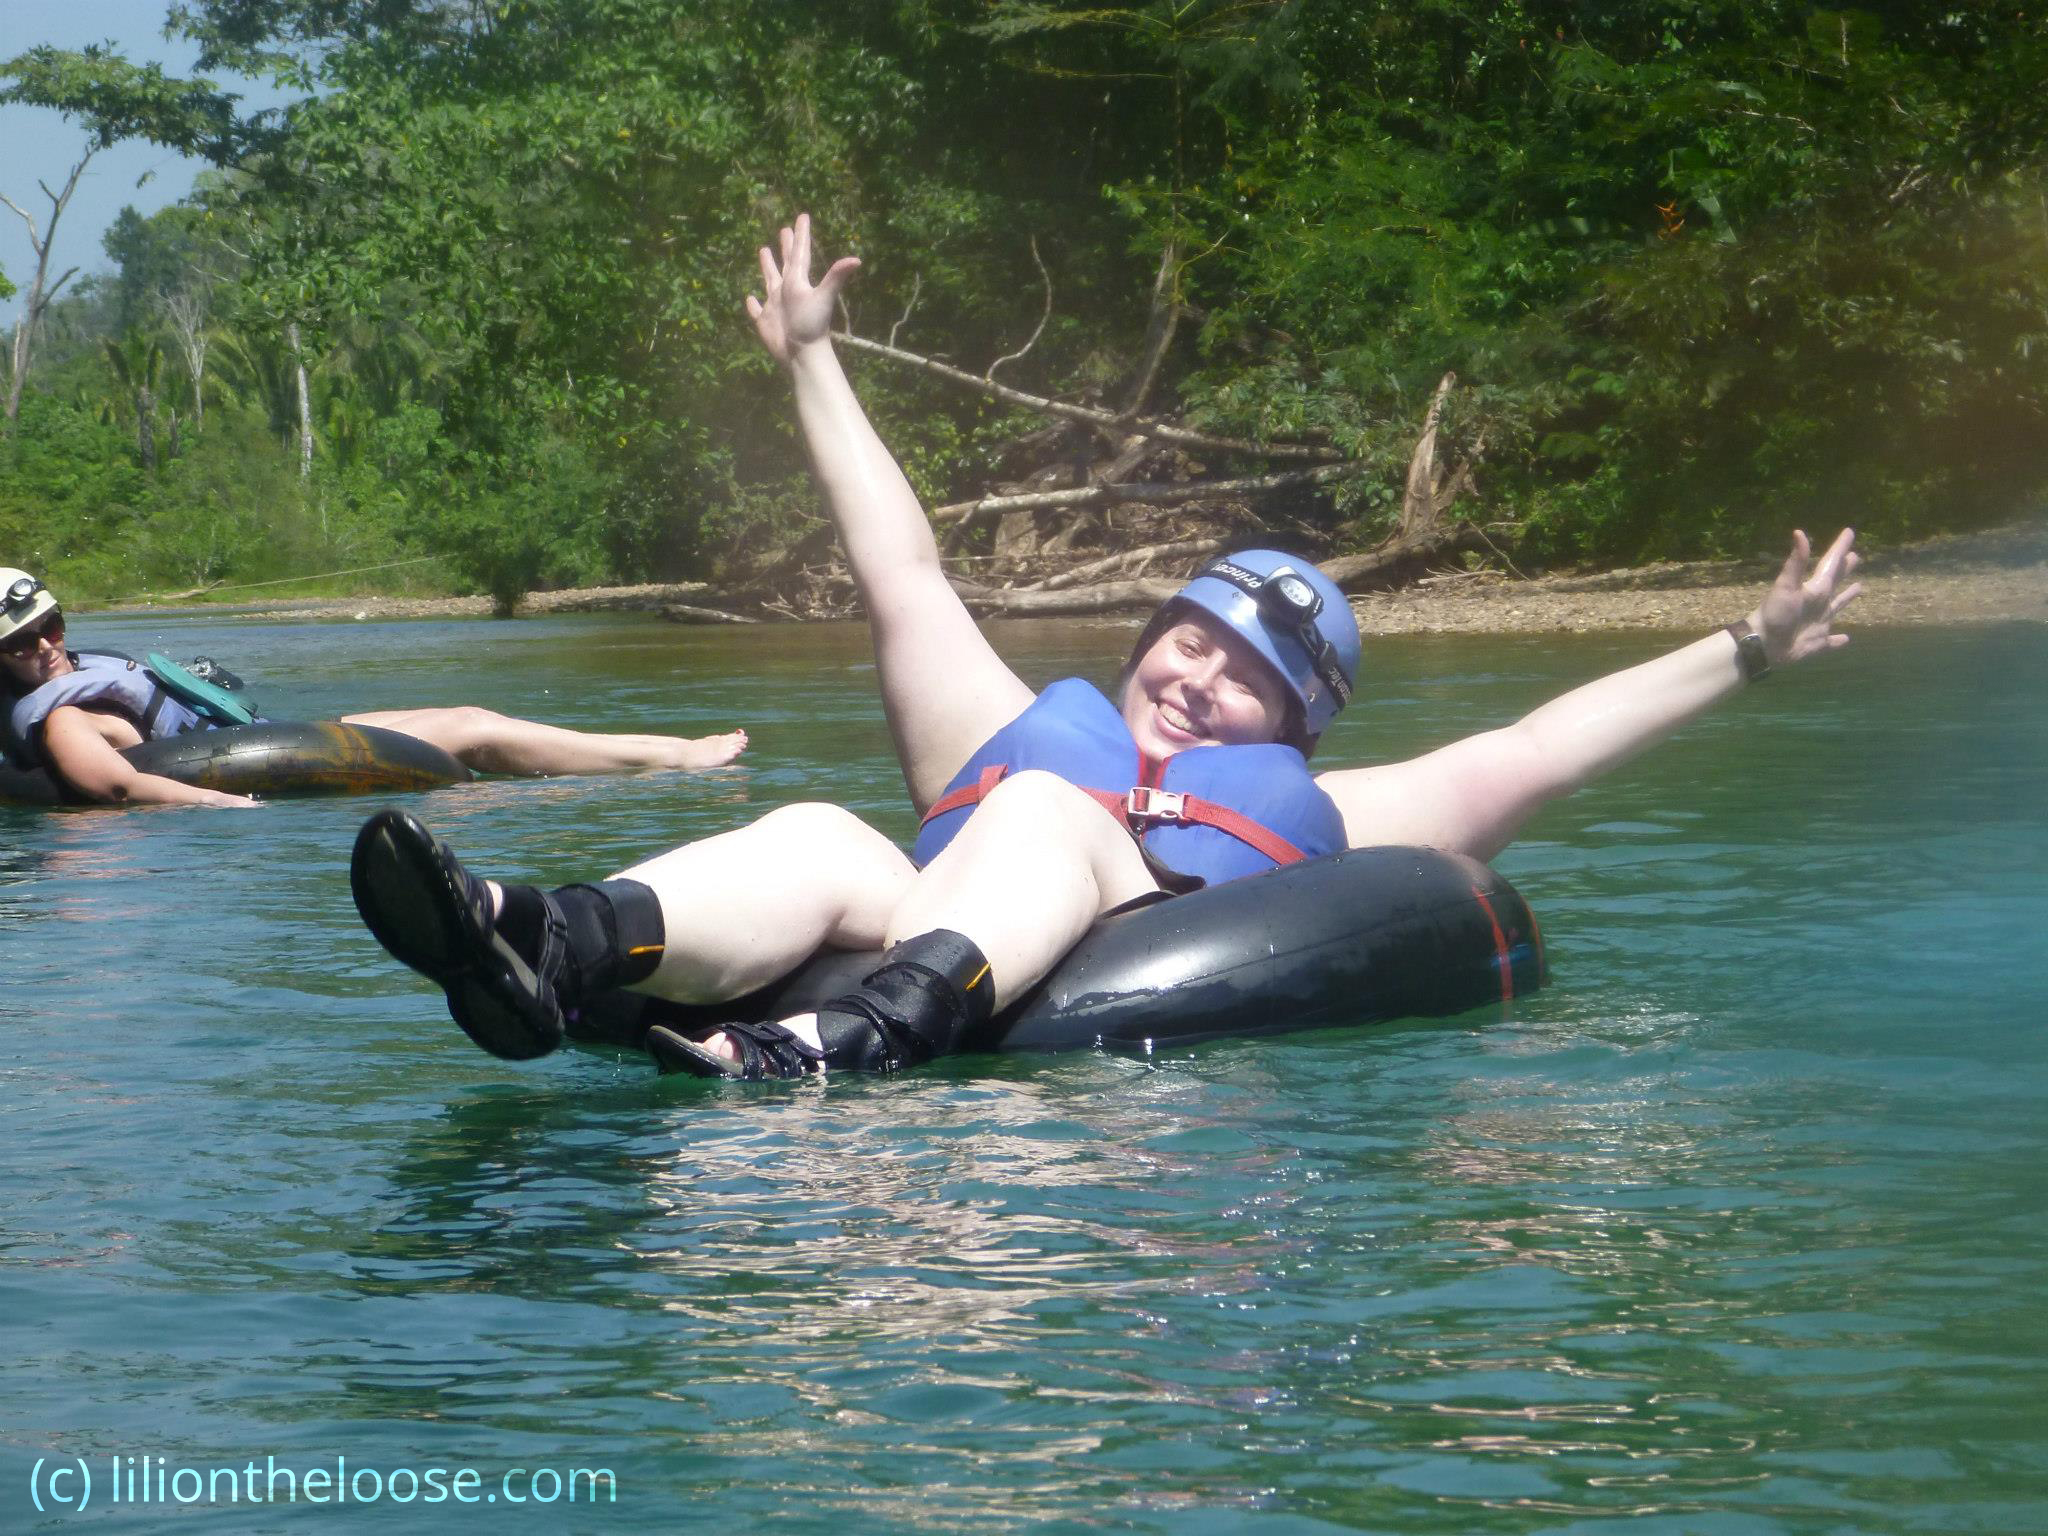 Floating down the river!